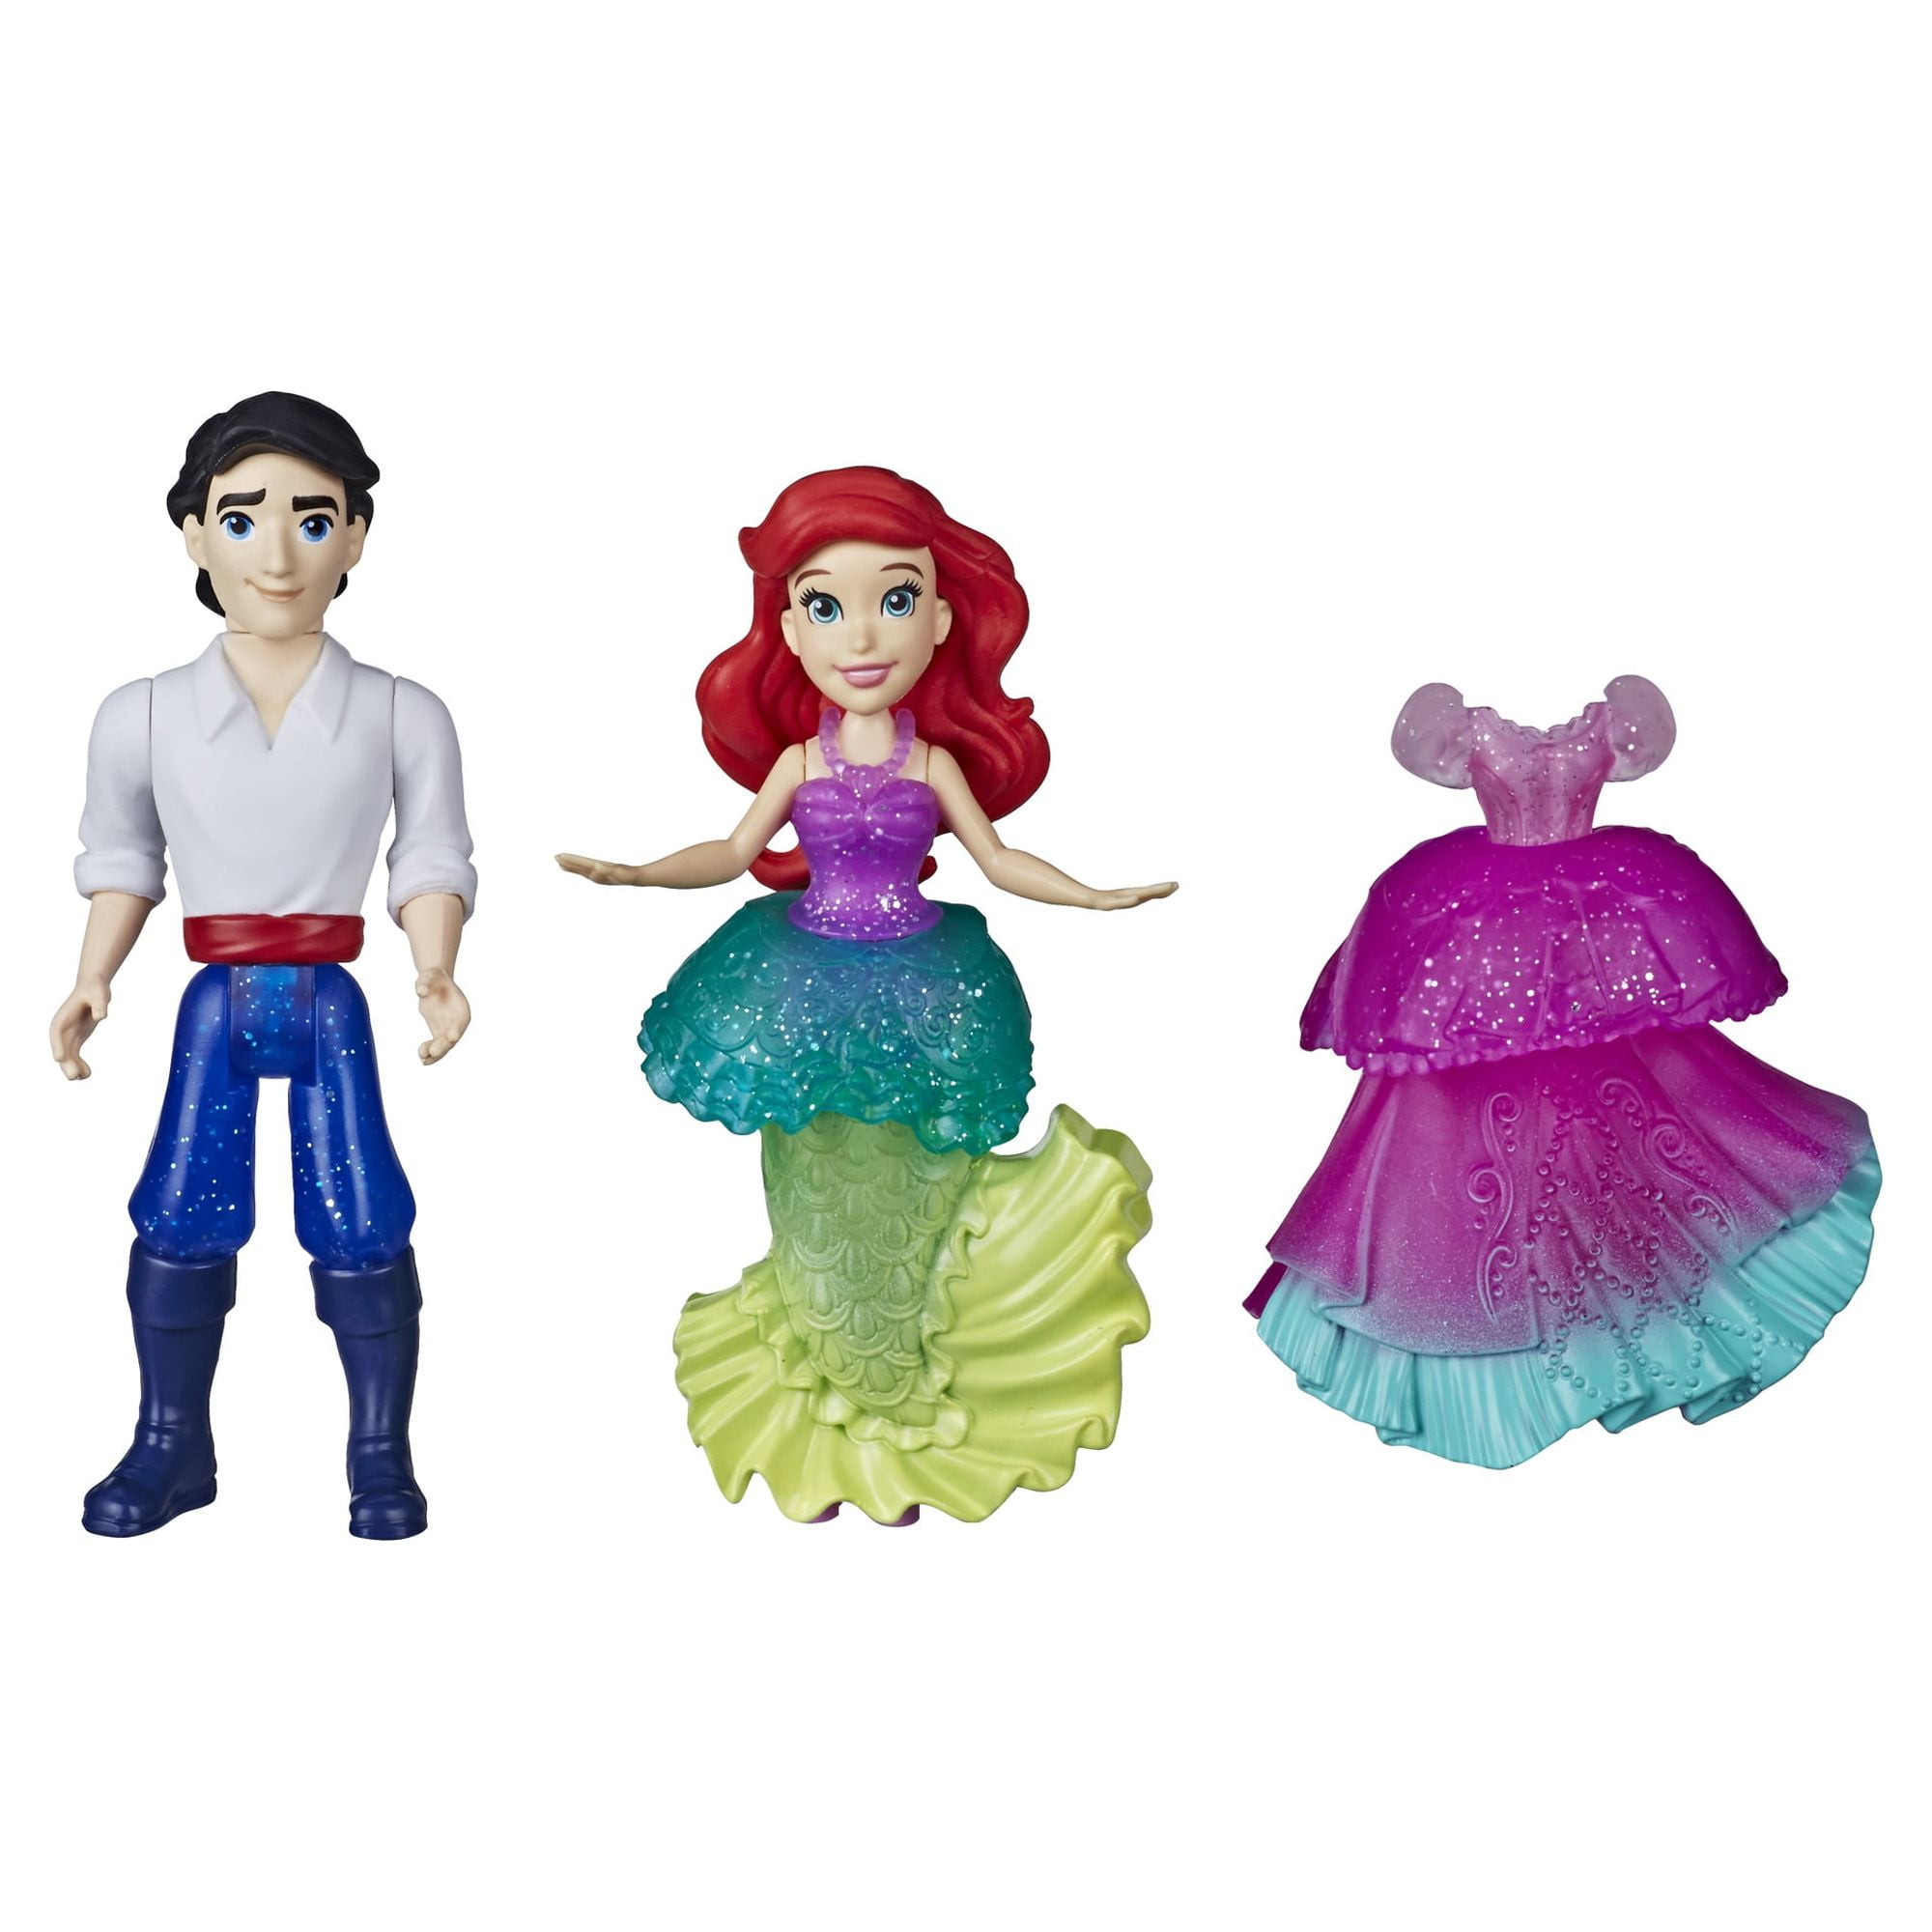 beat bank add photo pictures of ariel and prince eric